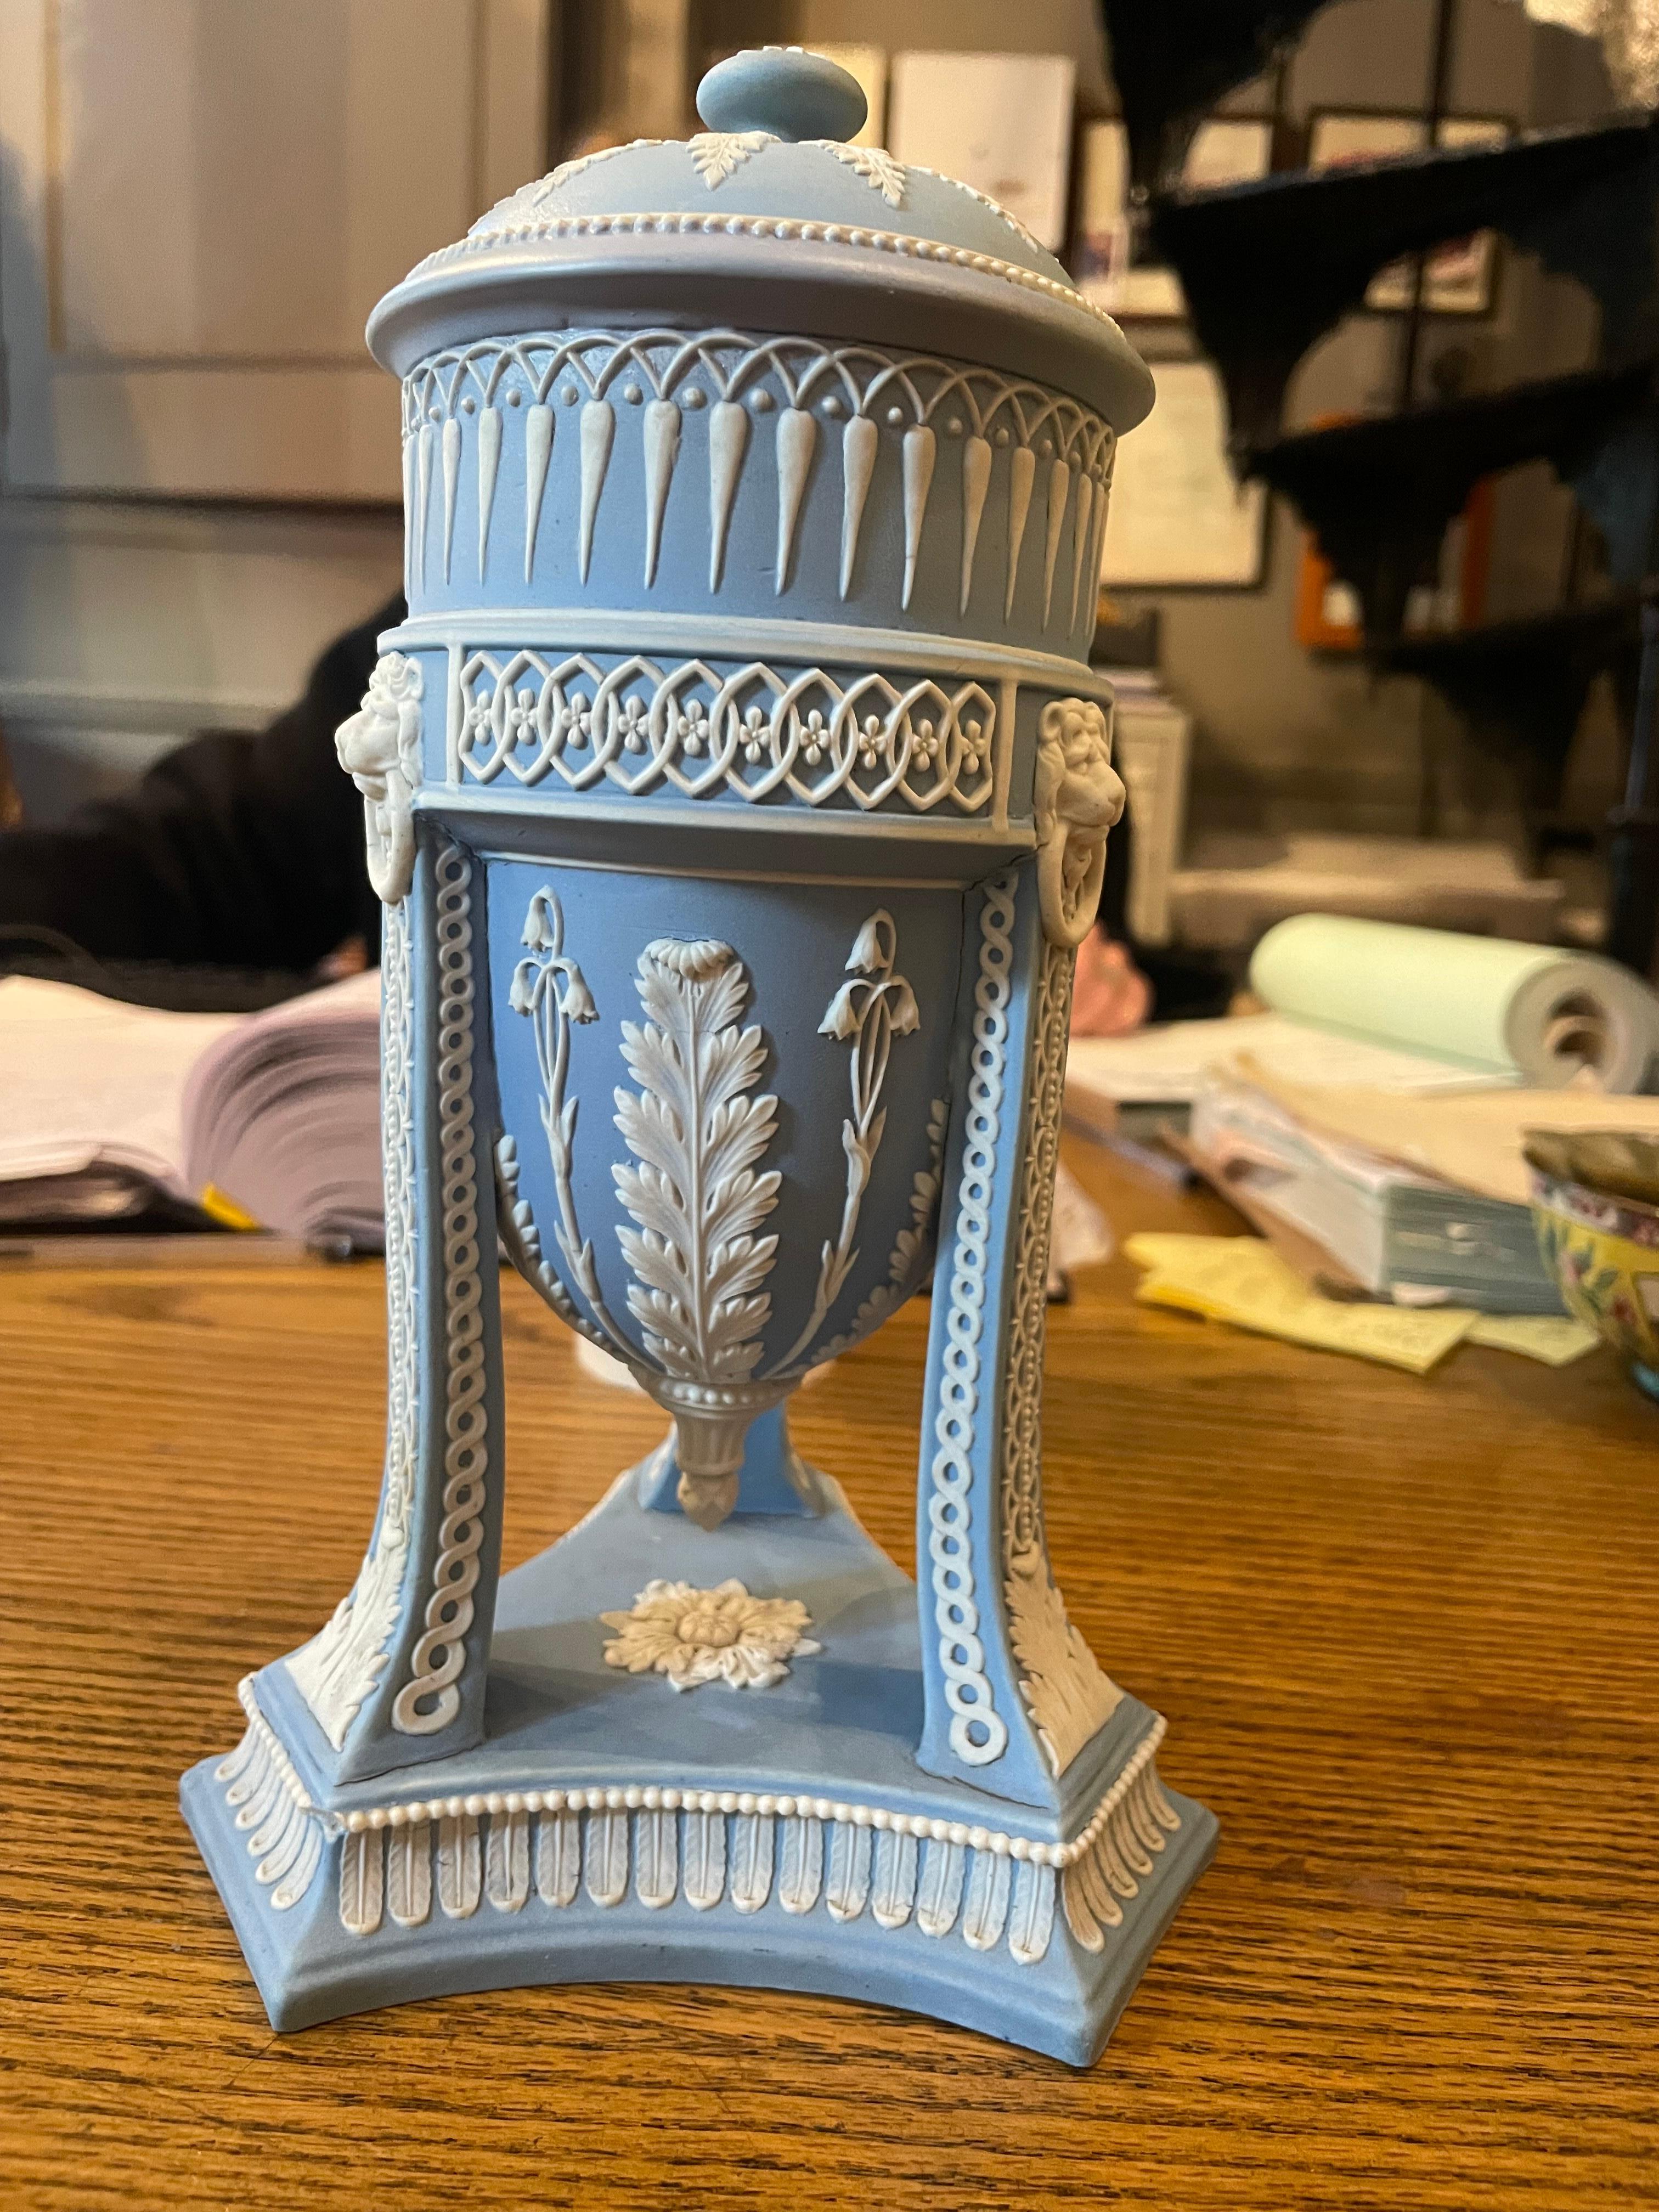 19th Century Wedgwood Jasper Vase In Excellent Condition For Sale In Dublin 8, IE